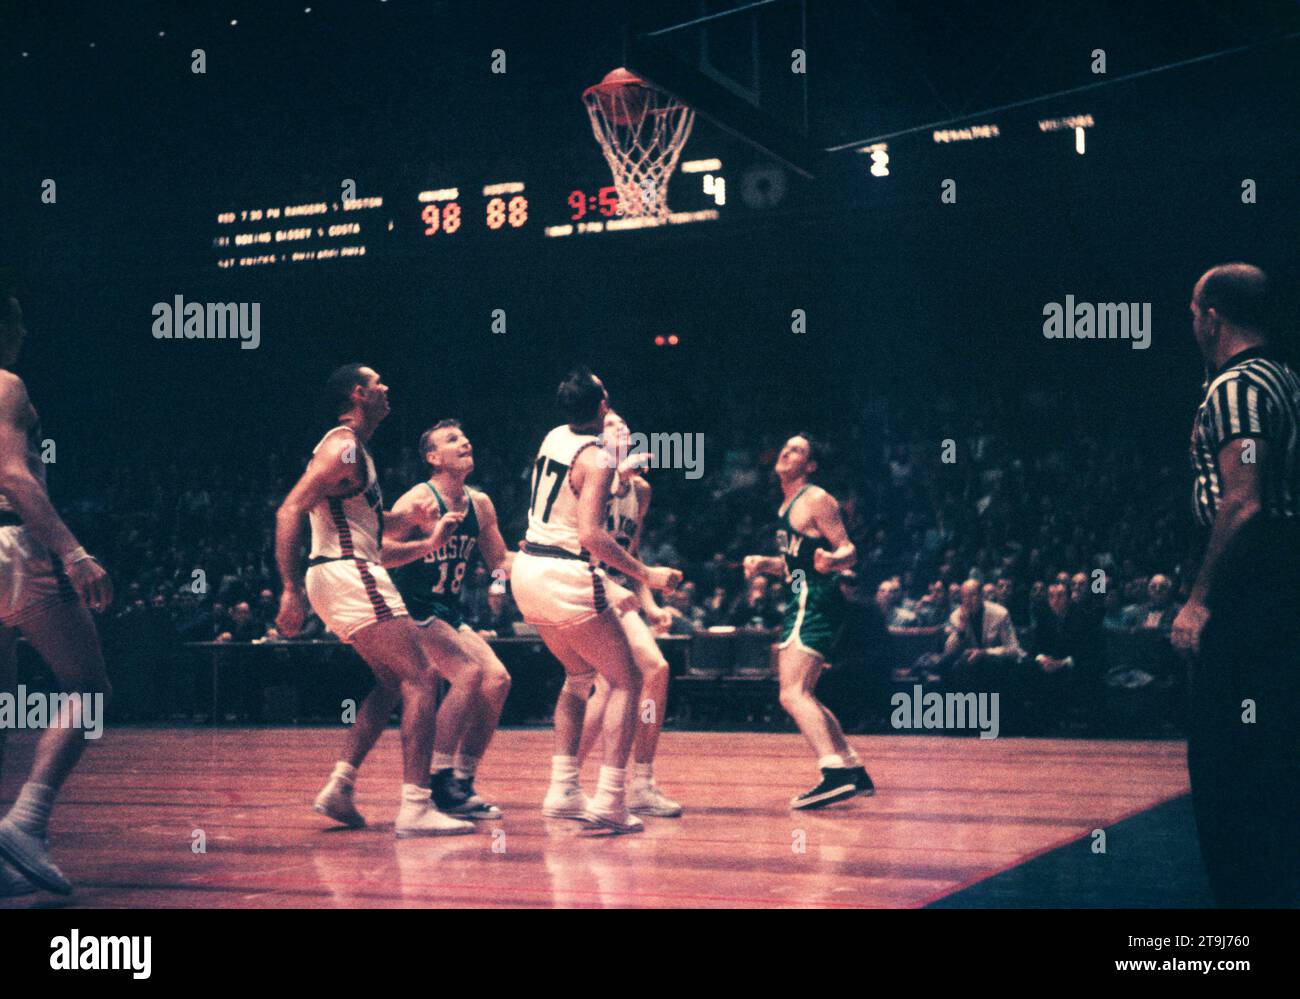 NEW YORK, NY - OCTOBER 25: Bill Sharman #21, Jim Loscutoff #18 of the Boston Celtics, Ron Sobie #17 and Kenny Sears of the New York Knicks look up at the basket during an NBA game on October 25, 1958 at the Madison Square Garden in New York, New York.  (Photo by Hy Peskin) *** Local Caption *** Bill Sharman;Jim Loscutoff;Ron Sobie;Kenny Sears Stock Photo